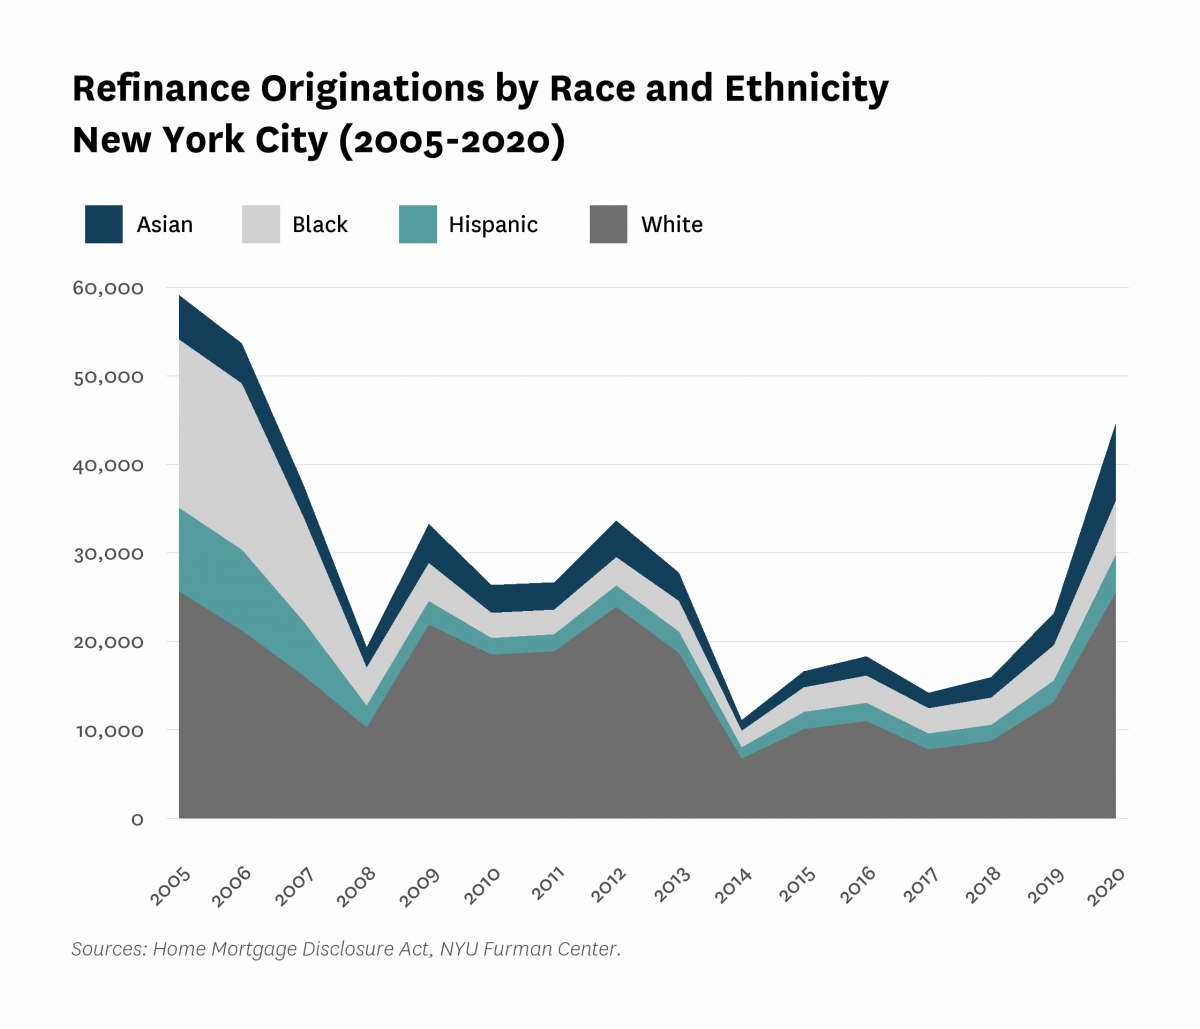 Area chart showing refinance originations by race and ethnicity in New York City from 2005 to 2020.